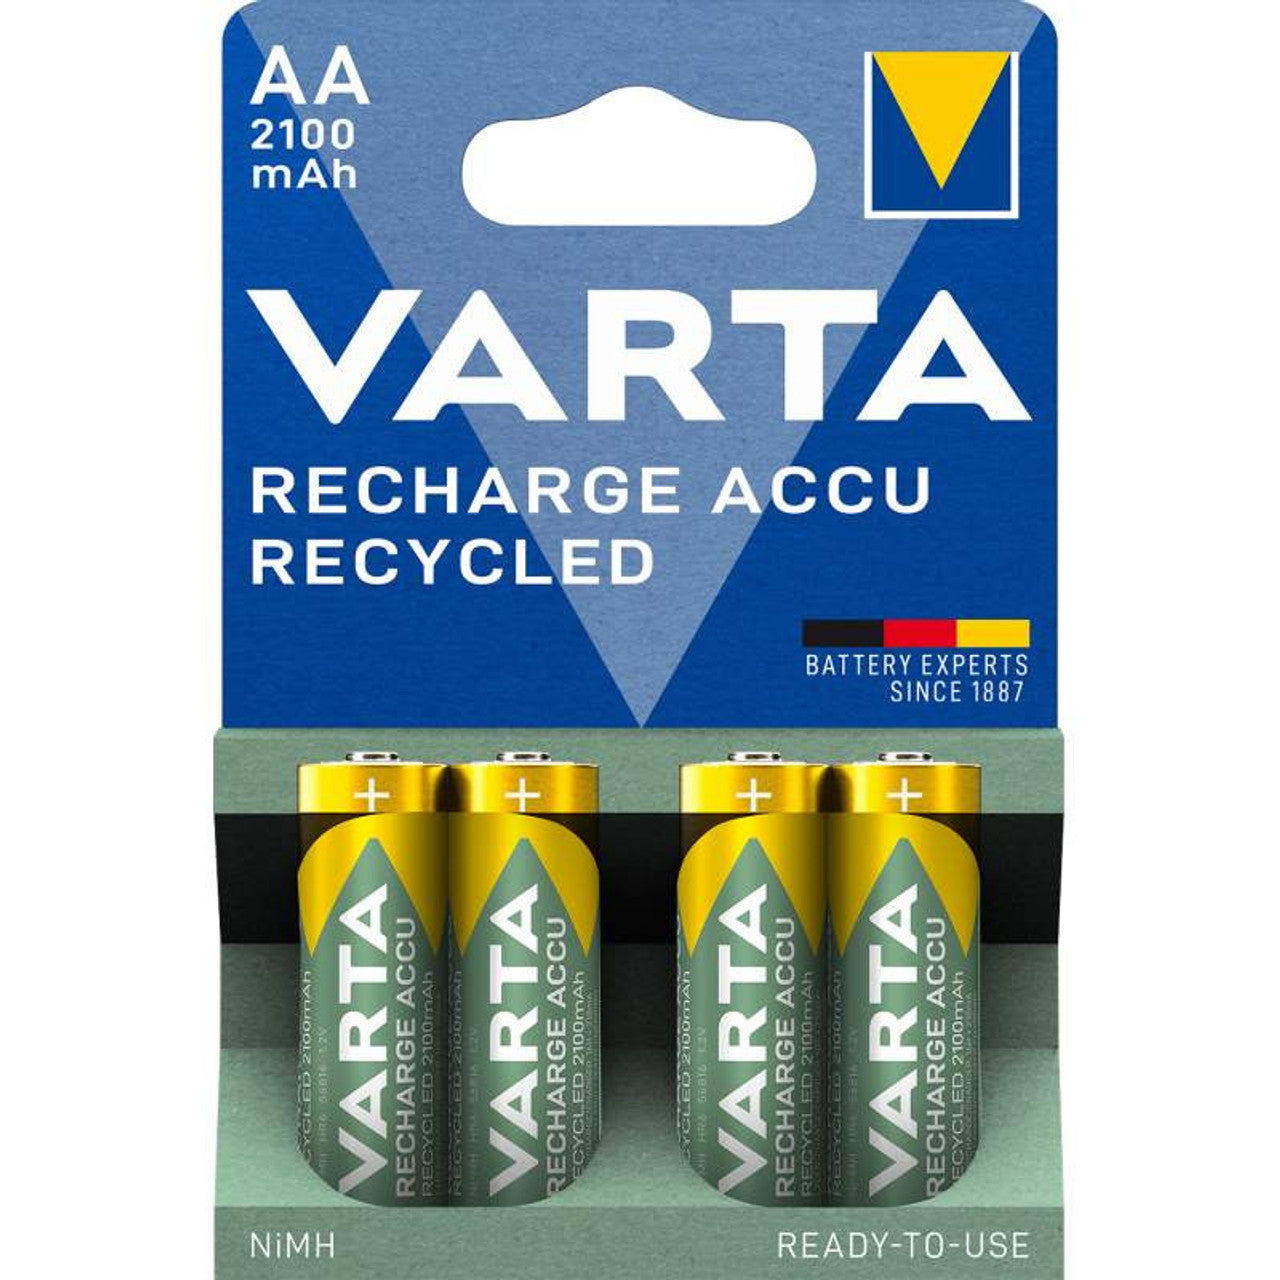 Varta Recycled rechargeable Accu (4 batteries AA - 2100mAh)